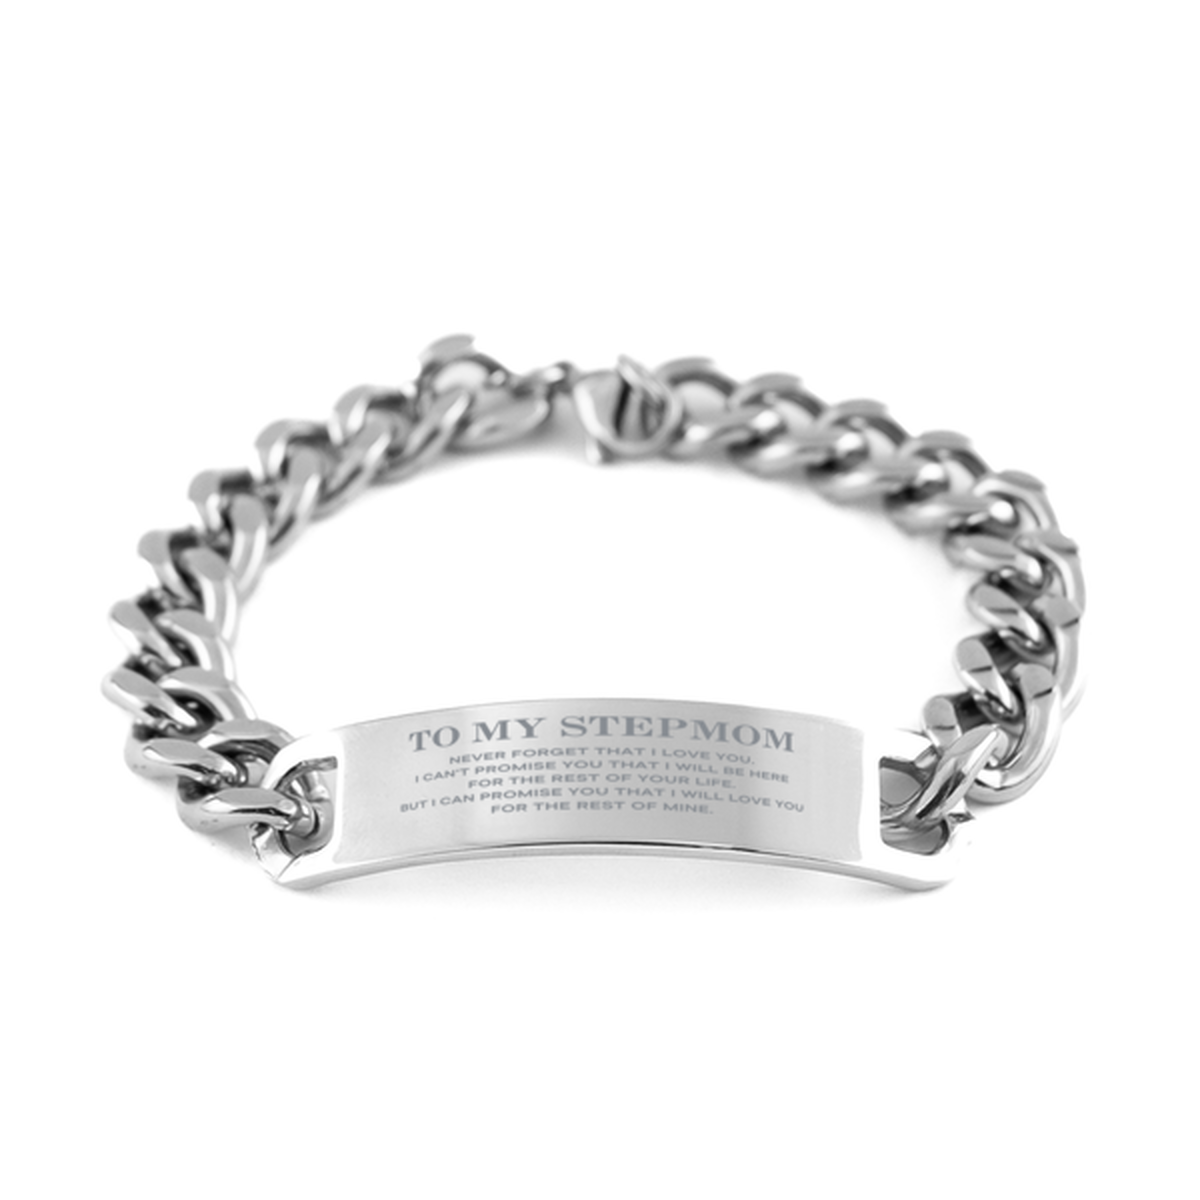 To My Stepmom Gifts, I will love you for the rest of mine, Love Stepmom Bracelet, Birthday Christmas Unique Cuban Chain Stainless Steel Bracelet For Stepmom